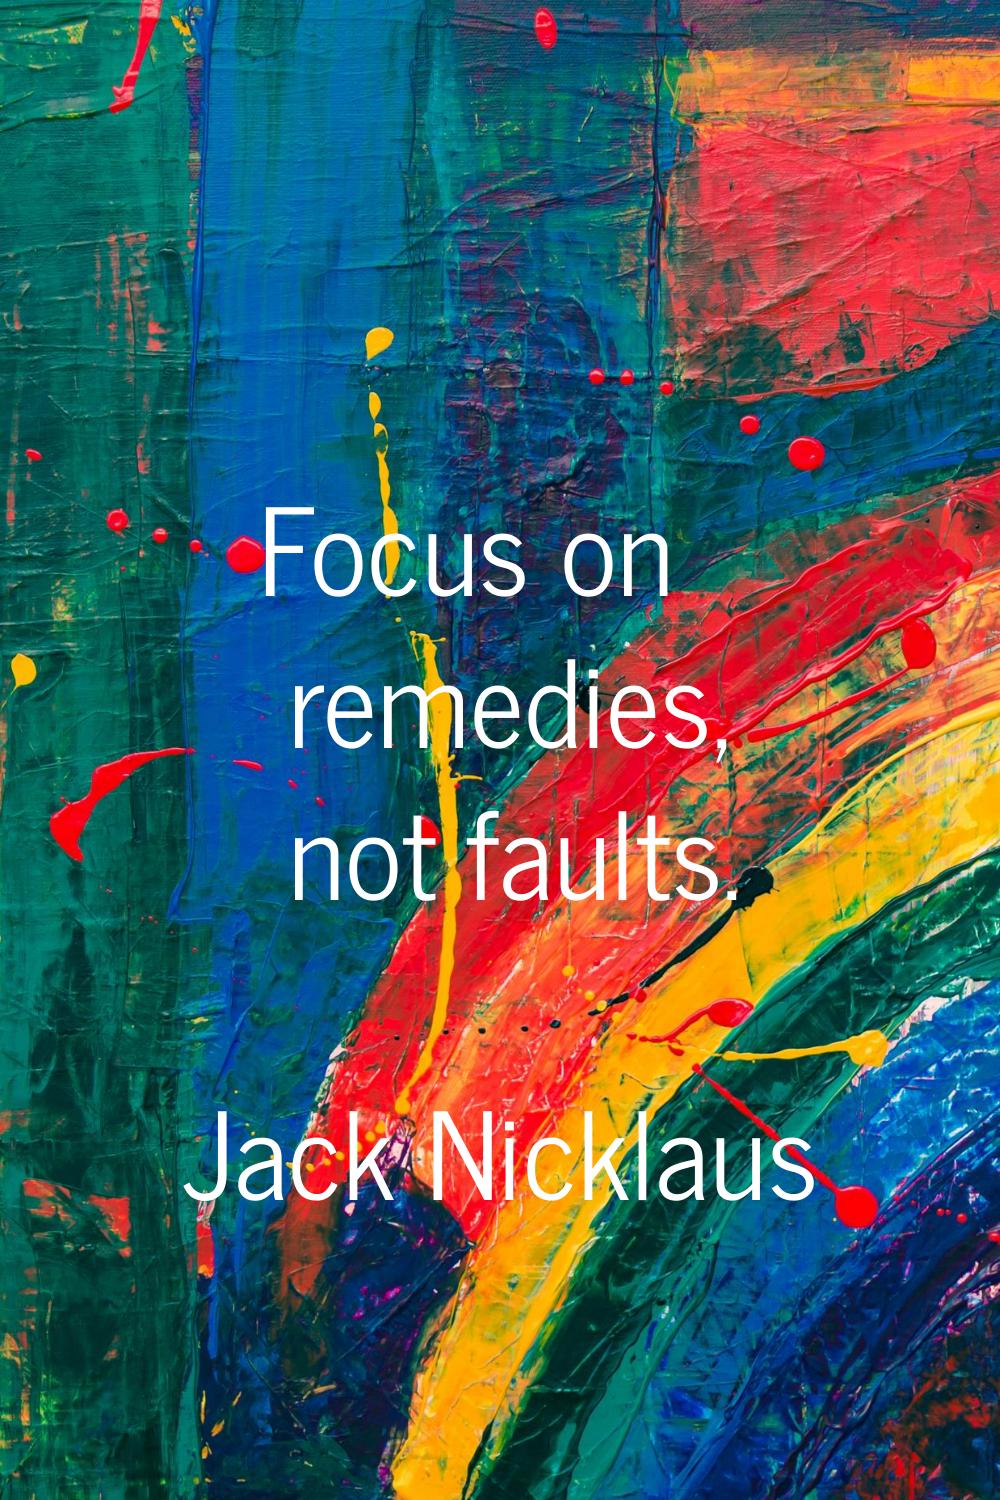 Focus on remedies, not faults.